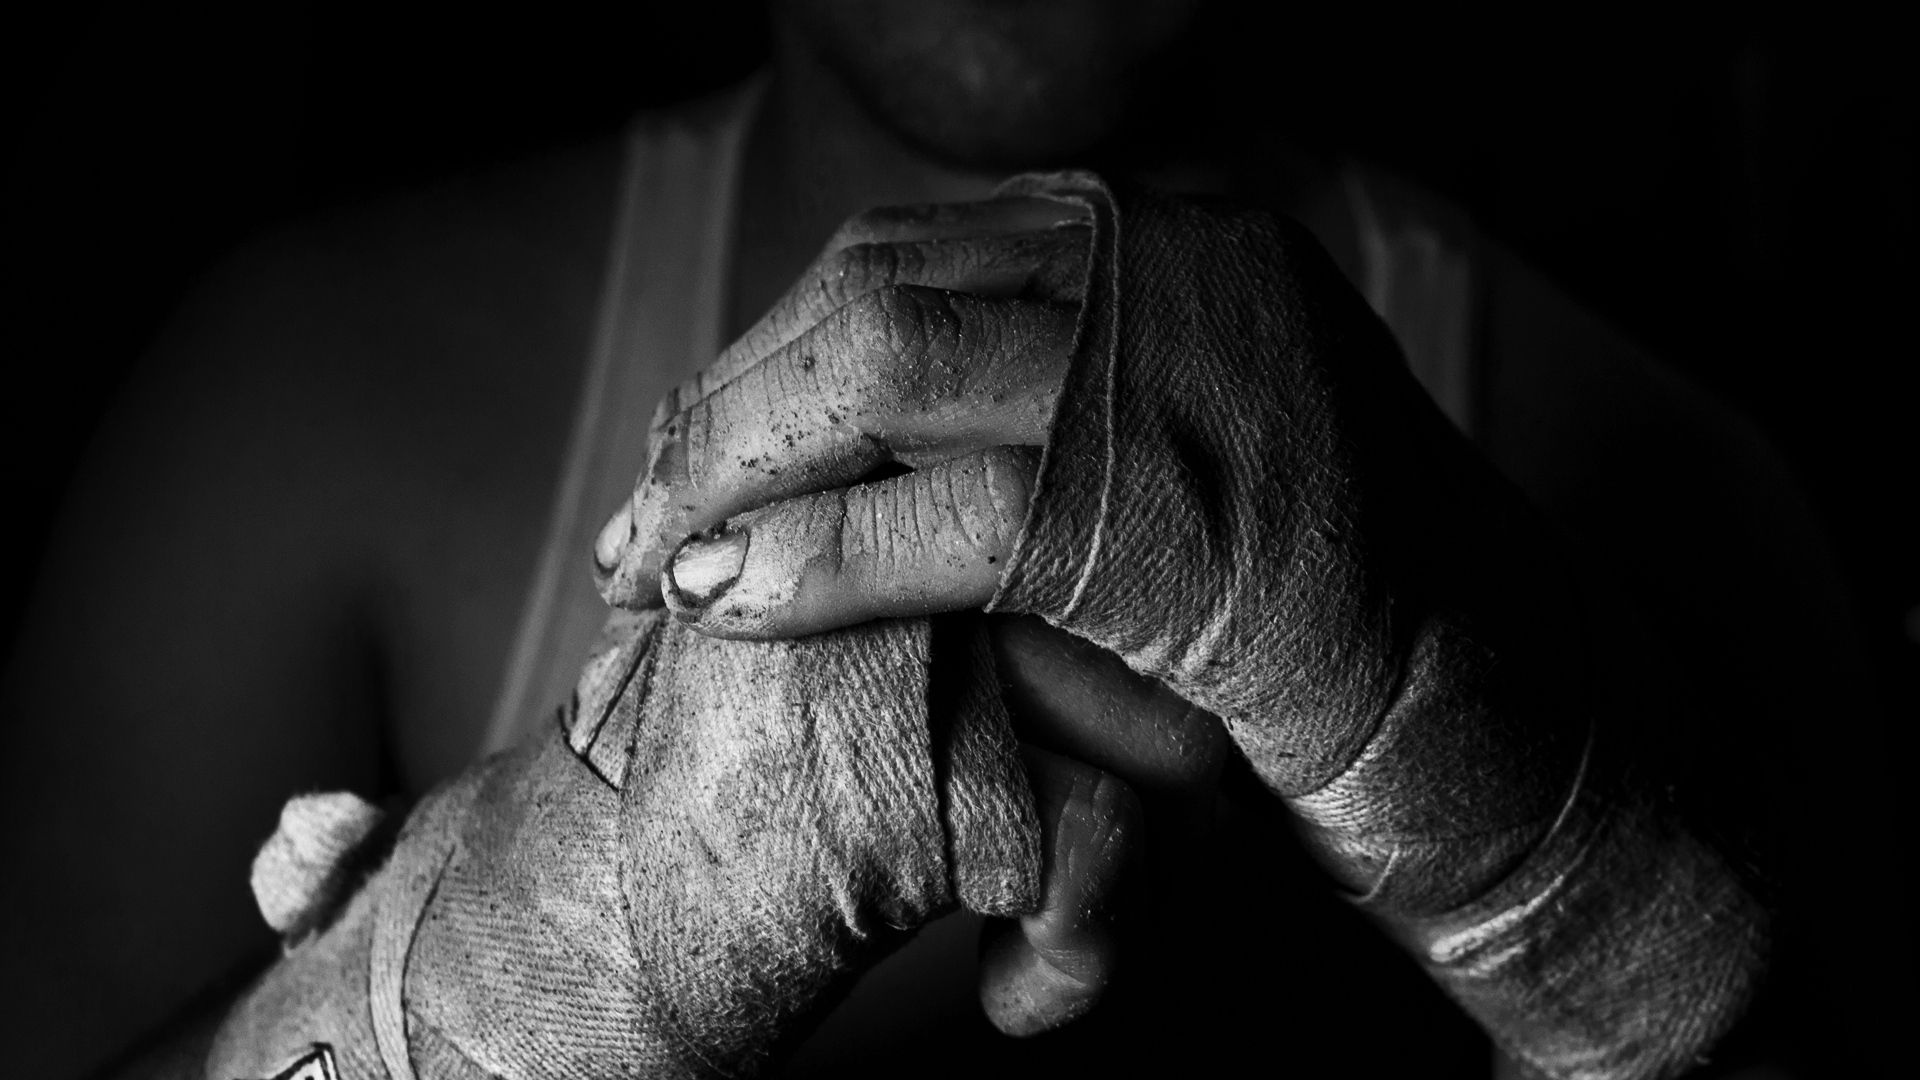 Free HD chb, sports, hands, bw, fighter, bandages